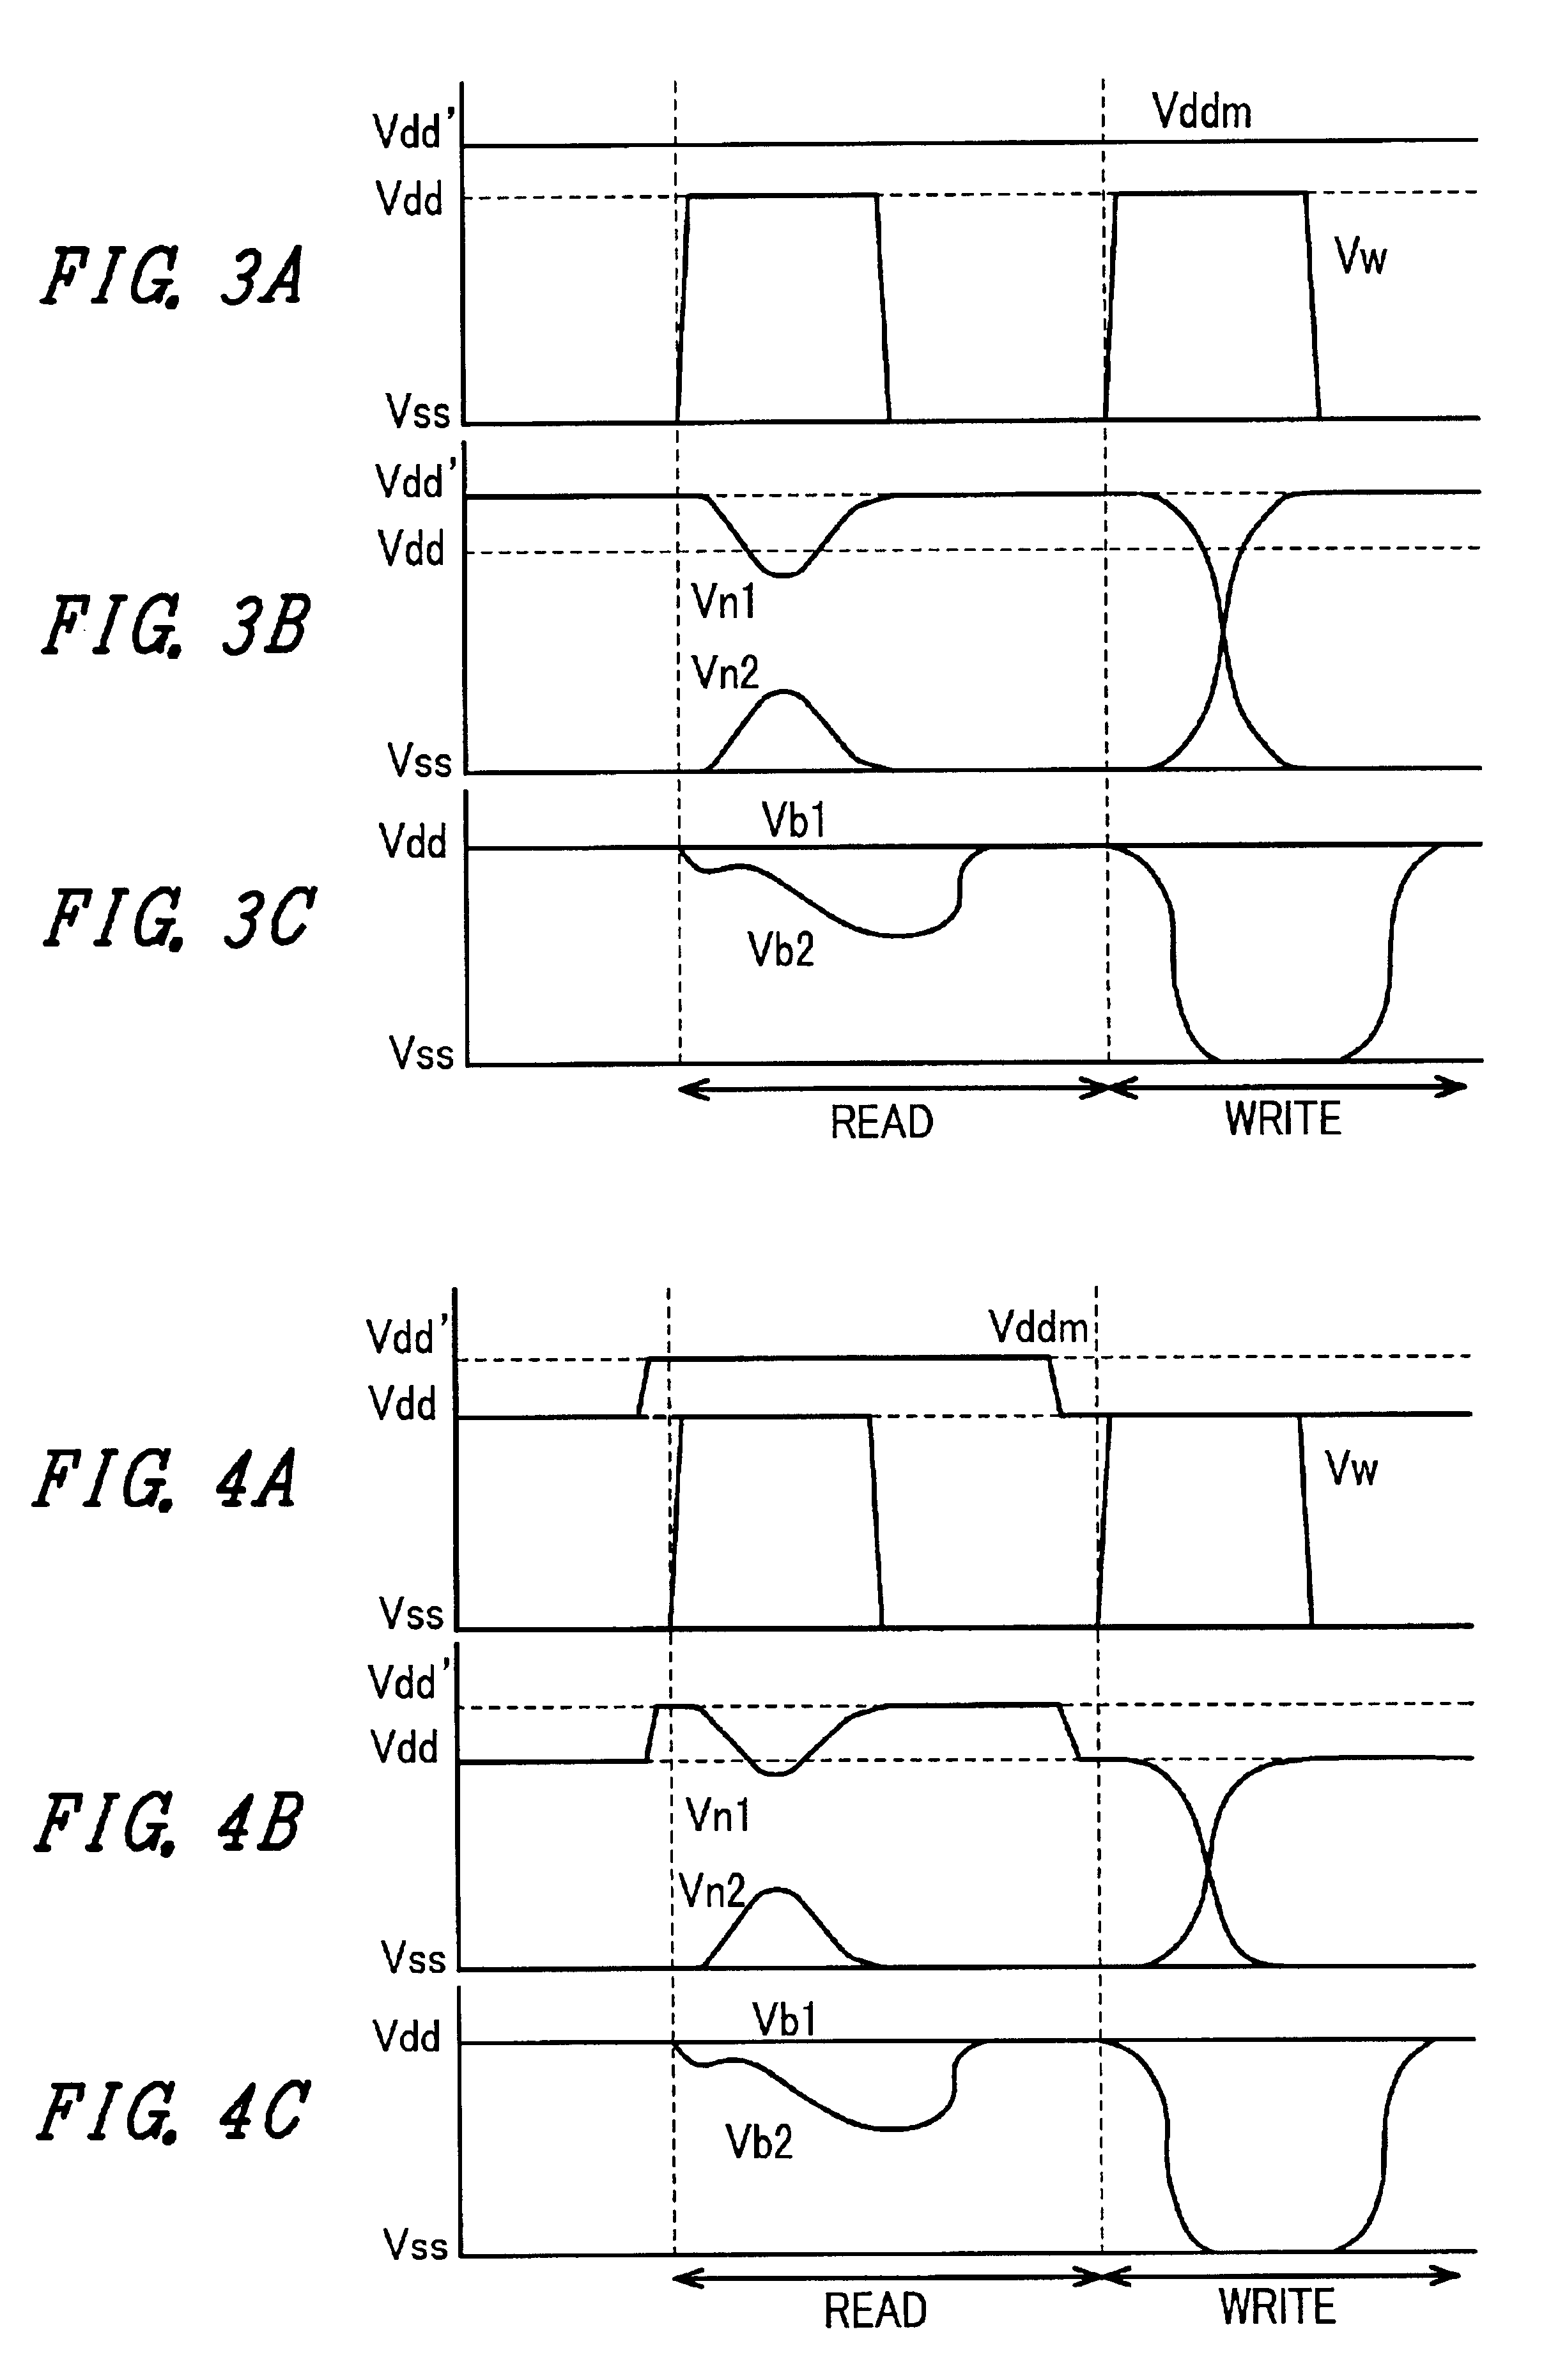 Semiconductor memory device with memory cells operated by boosted voltage